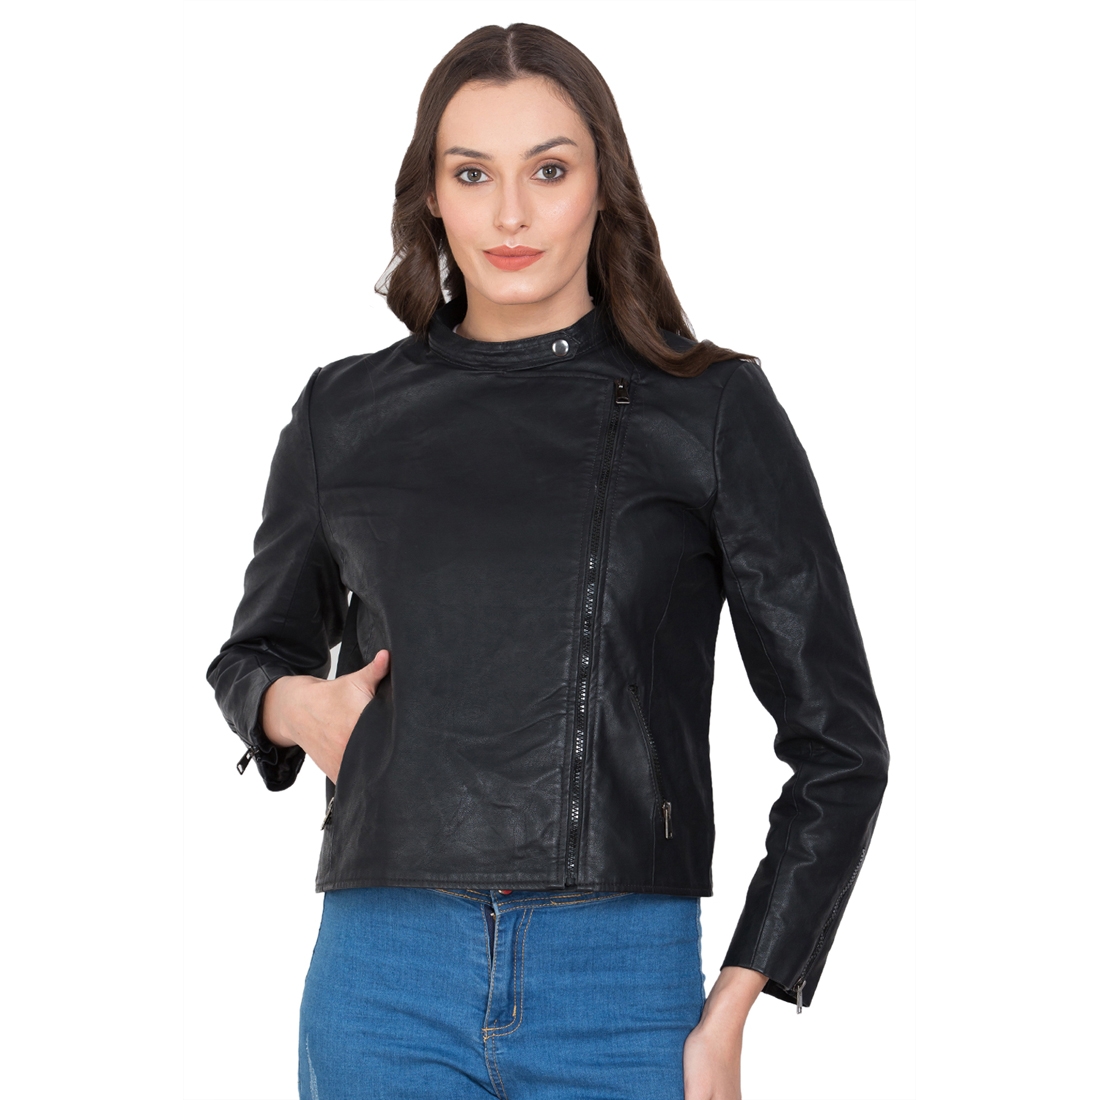 Justanned | JUSTANNED EMBARGO WOMEN LEATHER JACKET